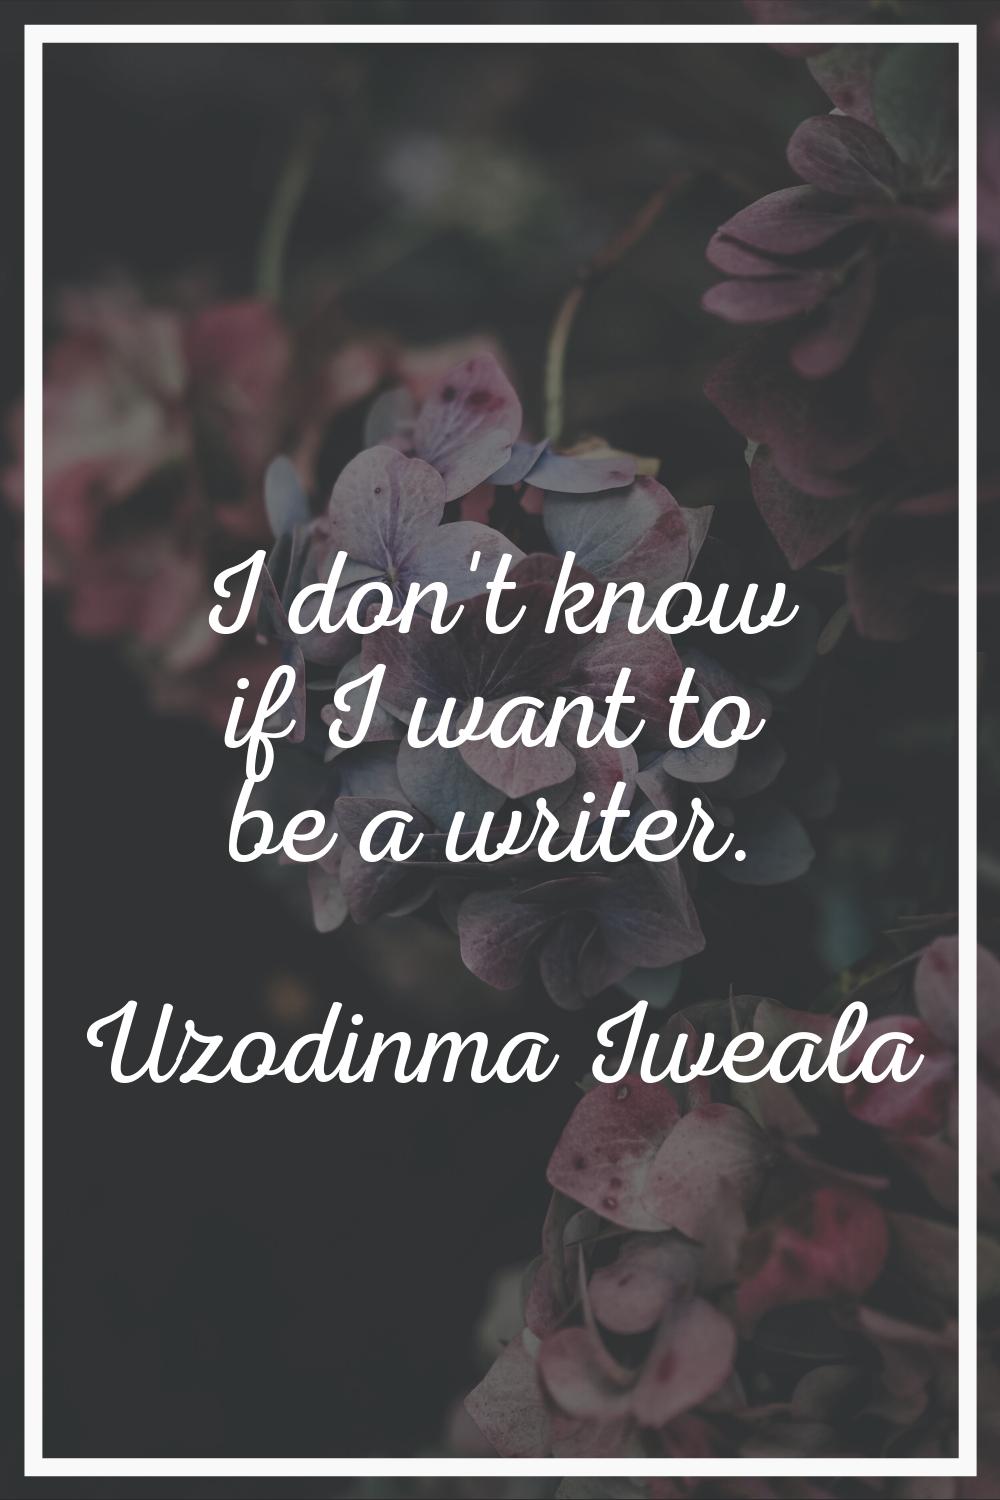 I don't know if I want to be a writer.